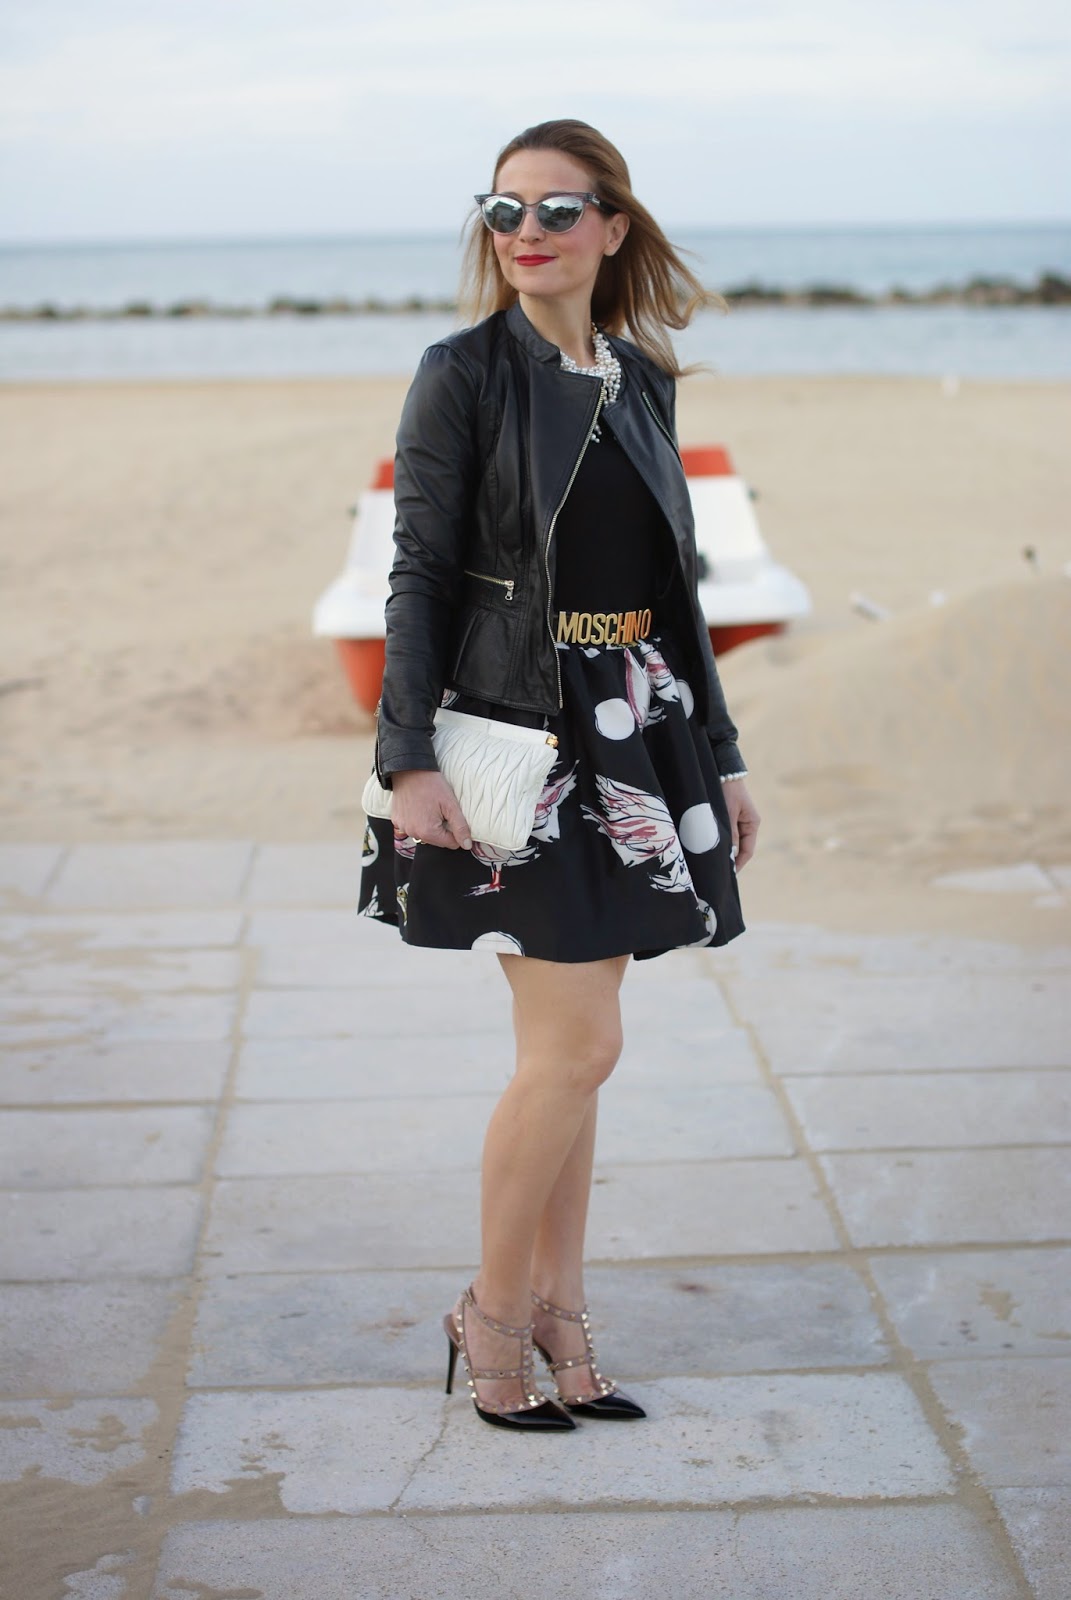 On My Dress Plus Valentino Rockstuds Still In Style? Fashion And Cookies Fashion And Beauty Blog feva.nl